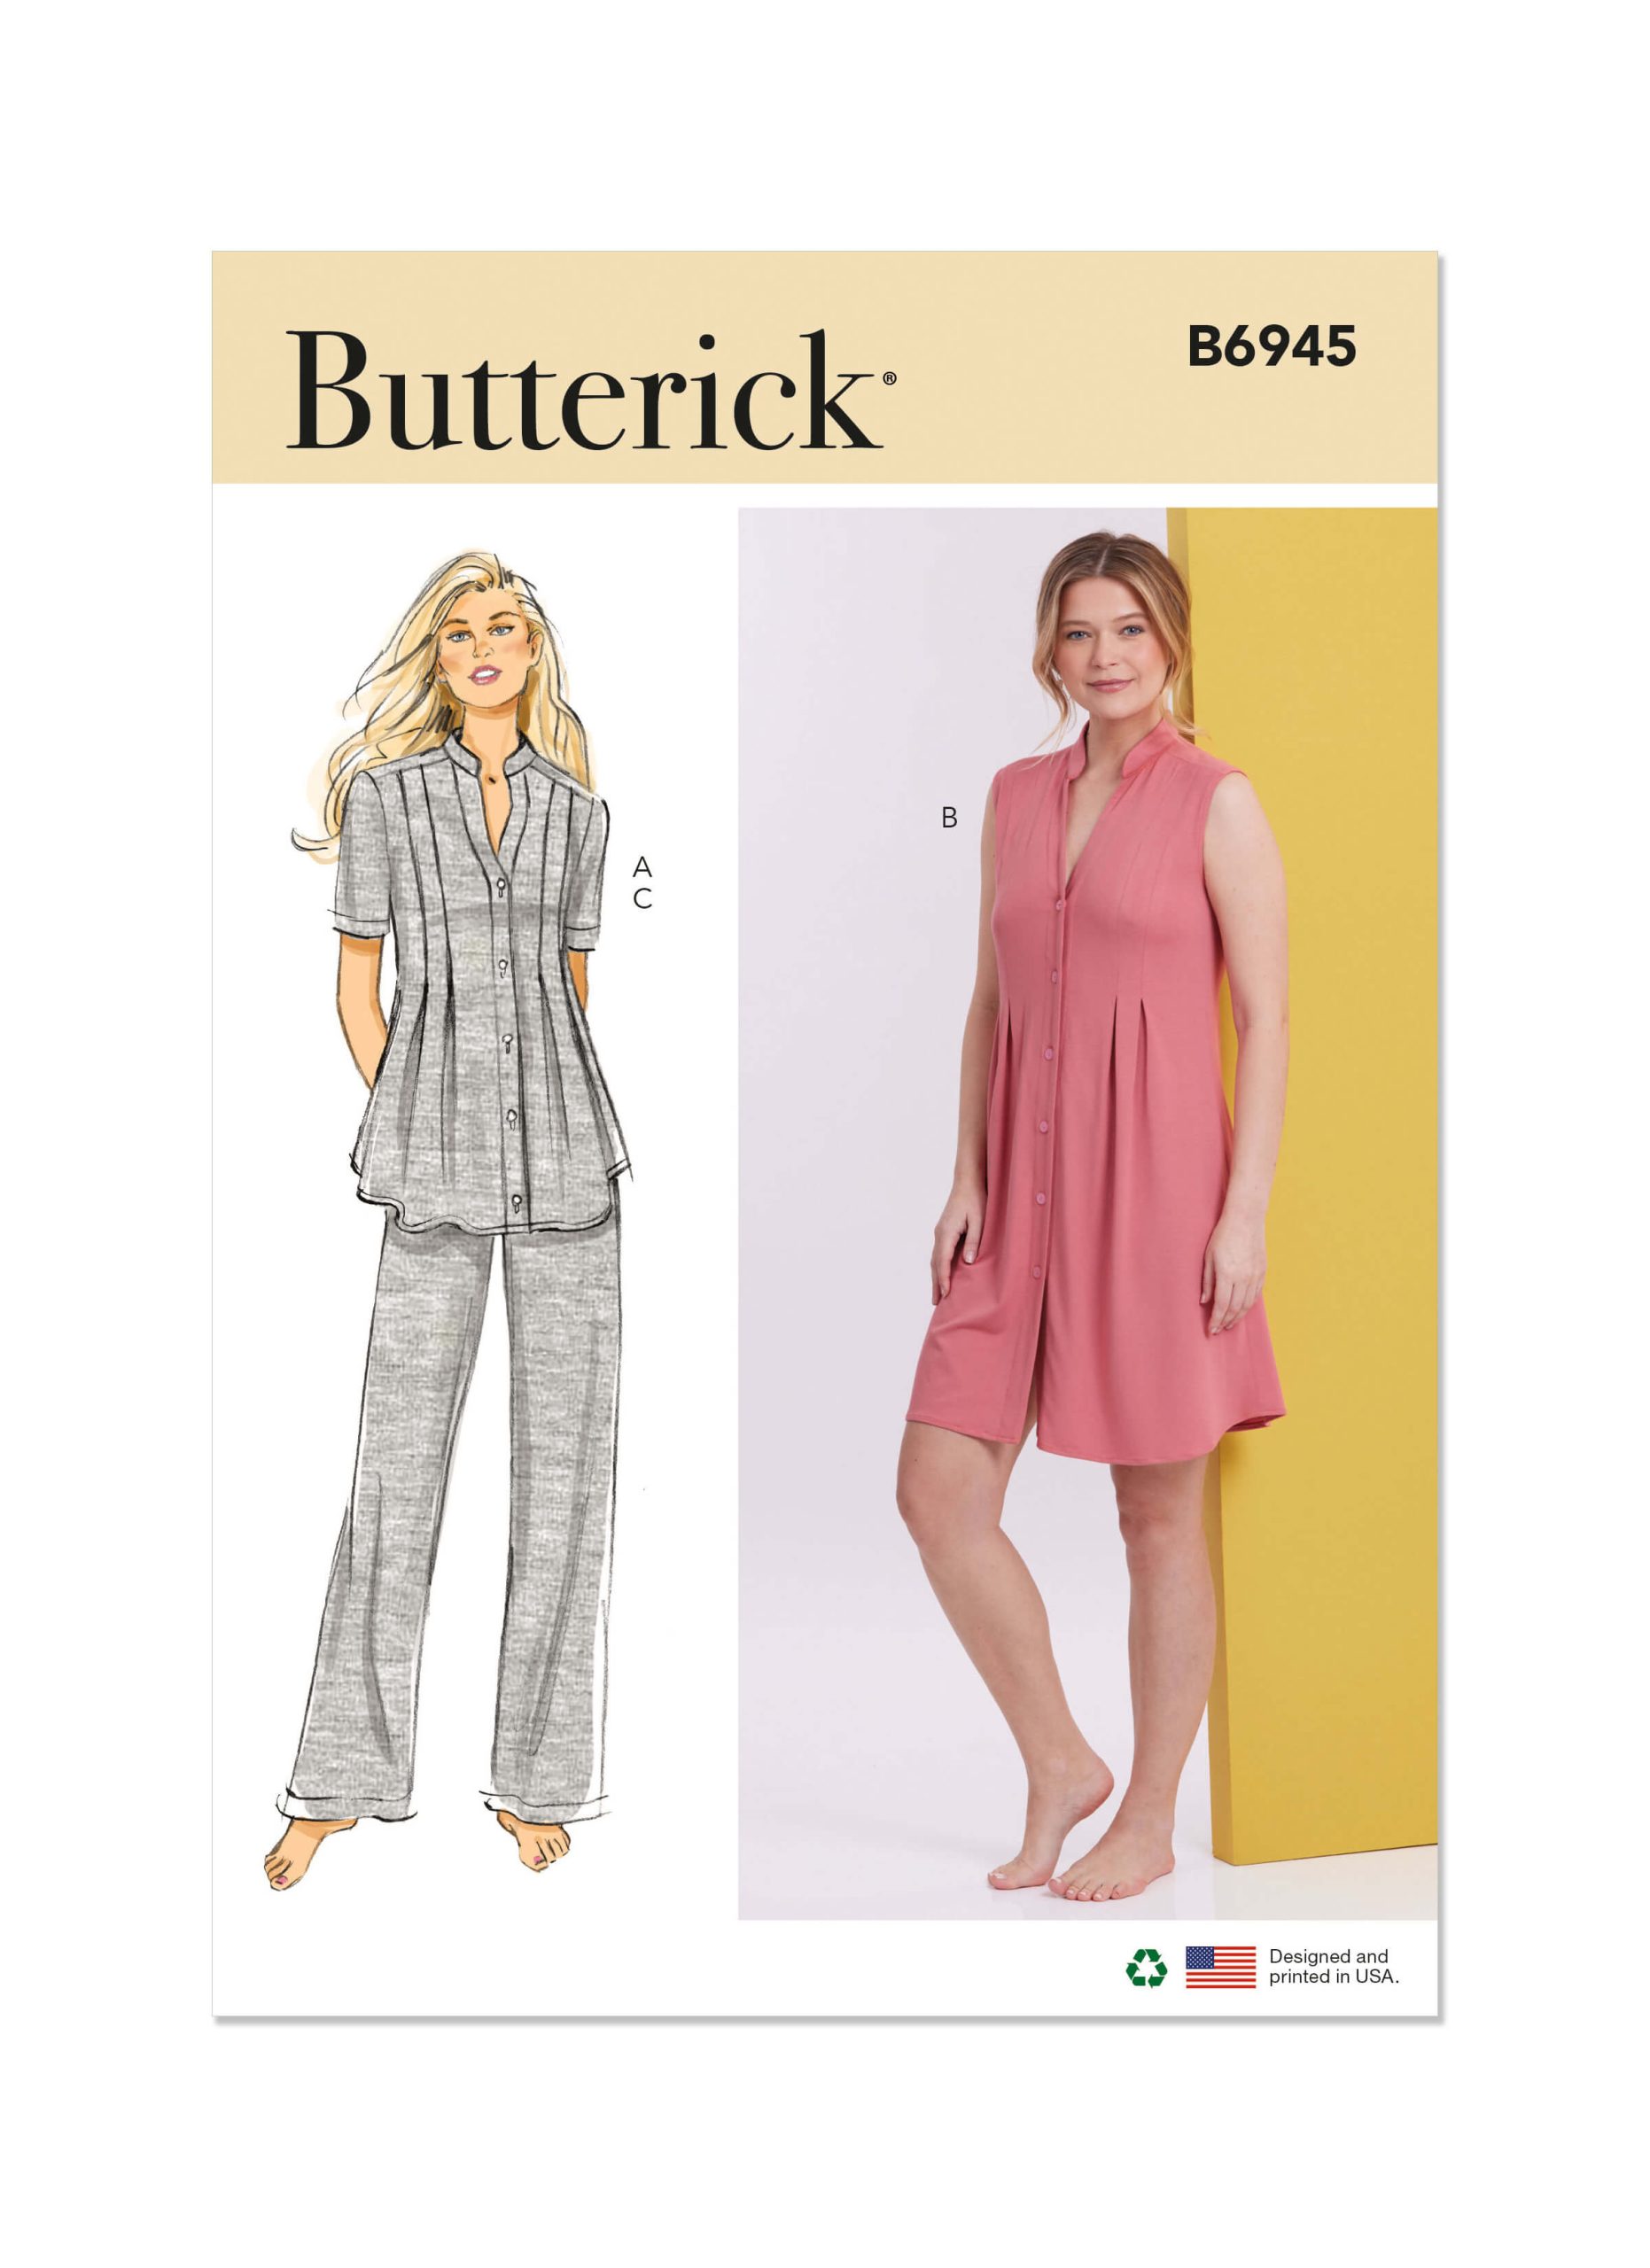 Butterick Sewing Pattern B6945 Misses' Knit Lounge Top, Dress and Trousers